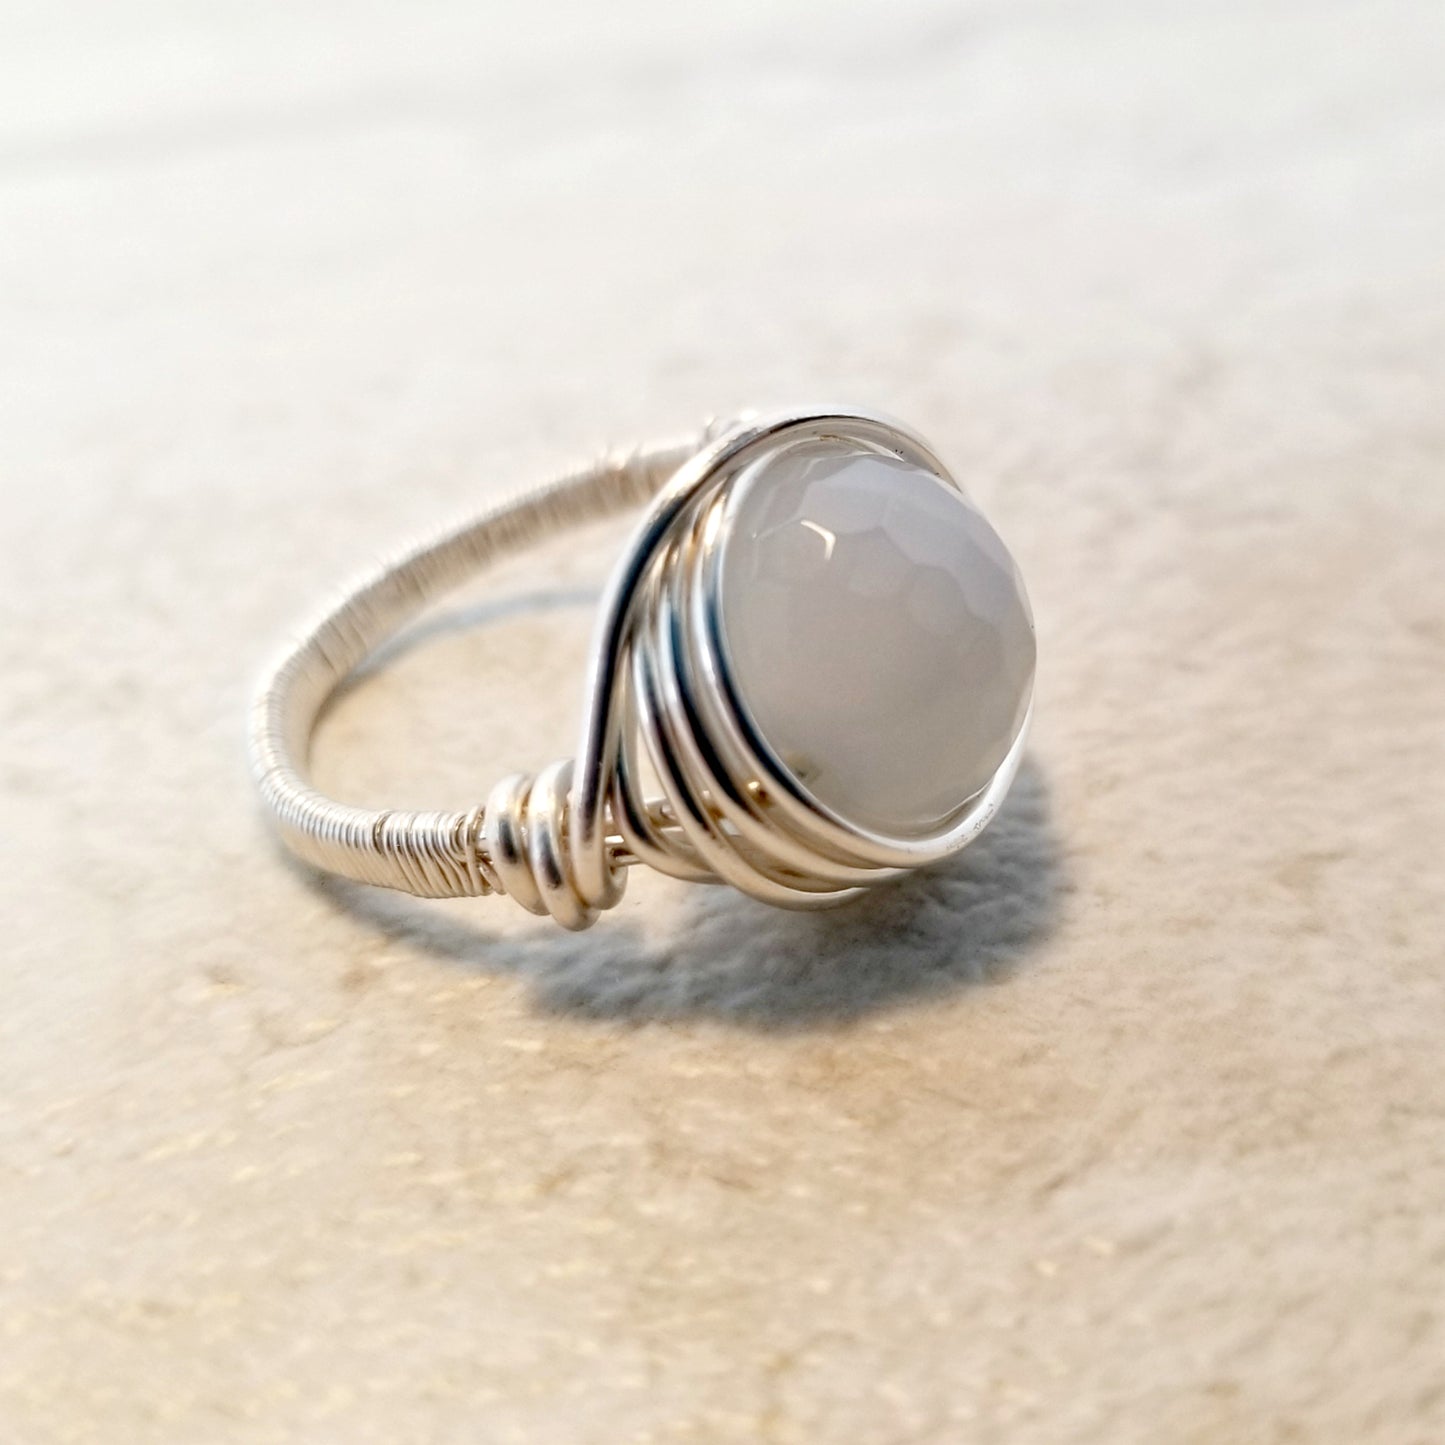 Silver Wire Ring, Gemstone Ring, Wire Wrapped Ring